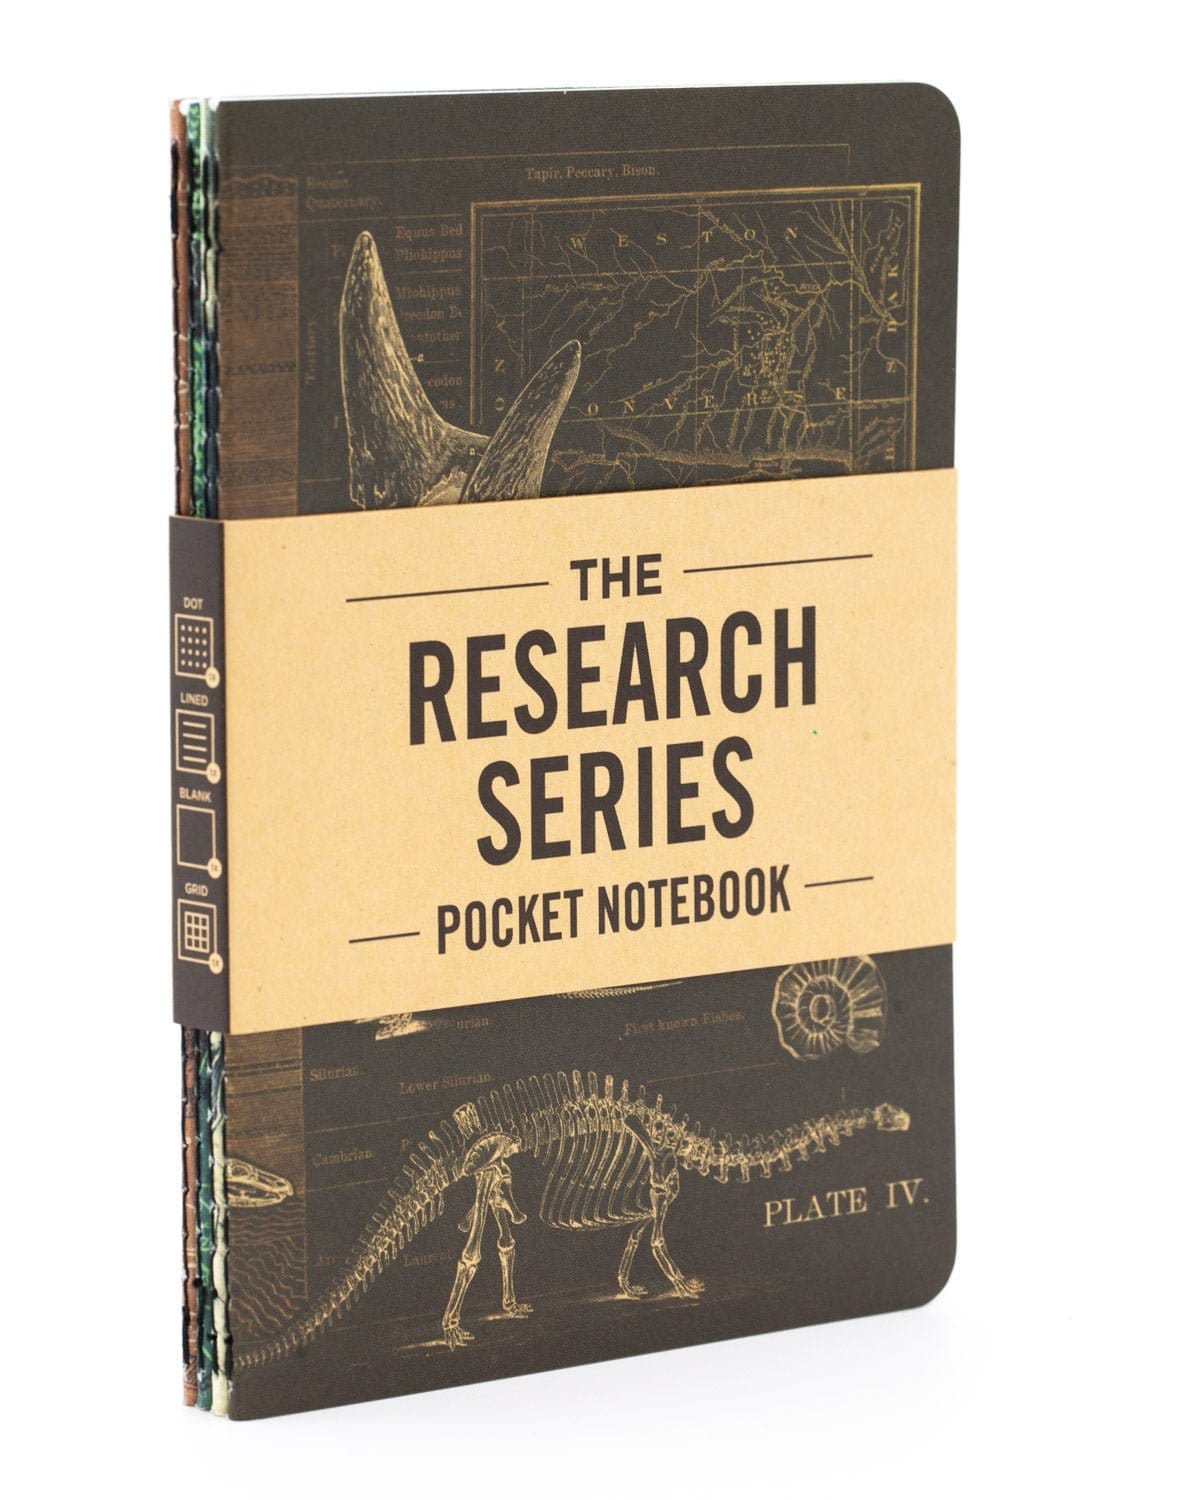 Set of pocket notebooks earth science